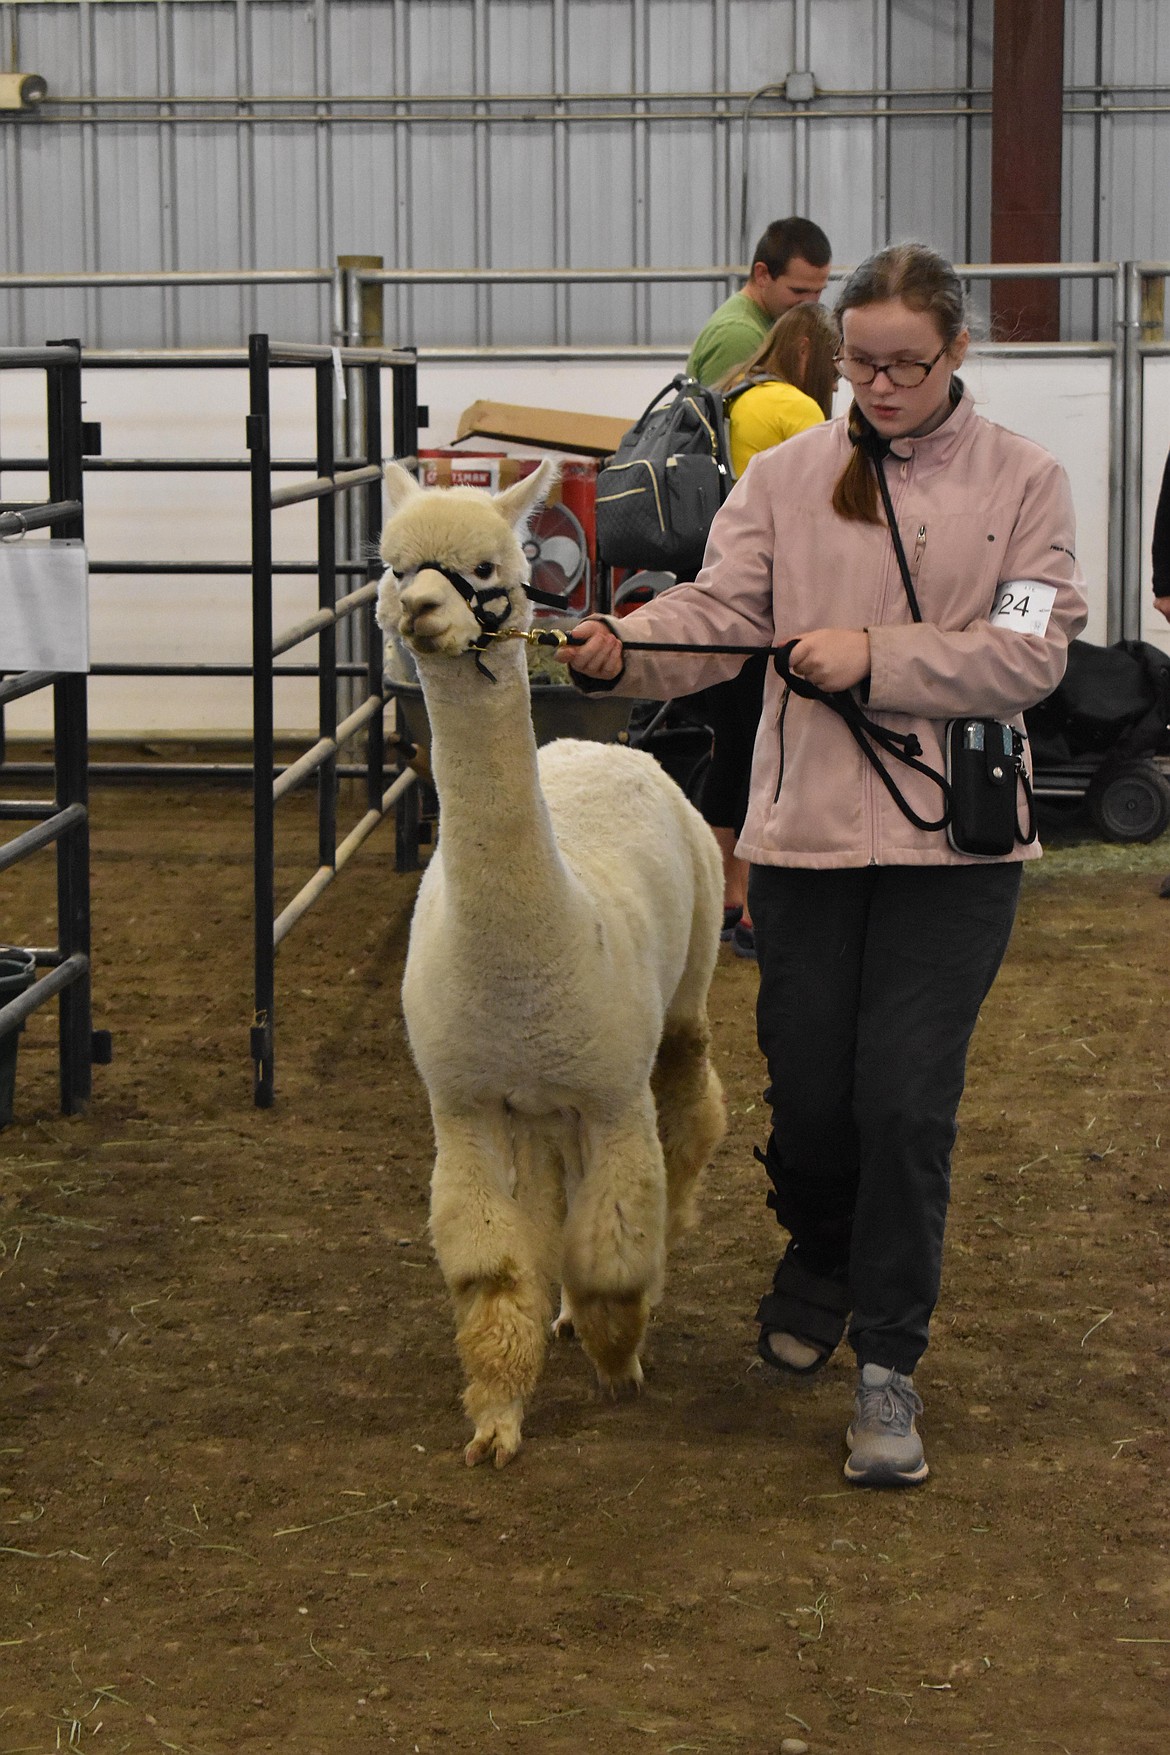 Brooke McCammon, of Monroe, brings her alpaca out from its pen Saturday for judging.